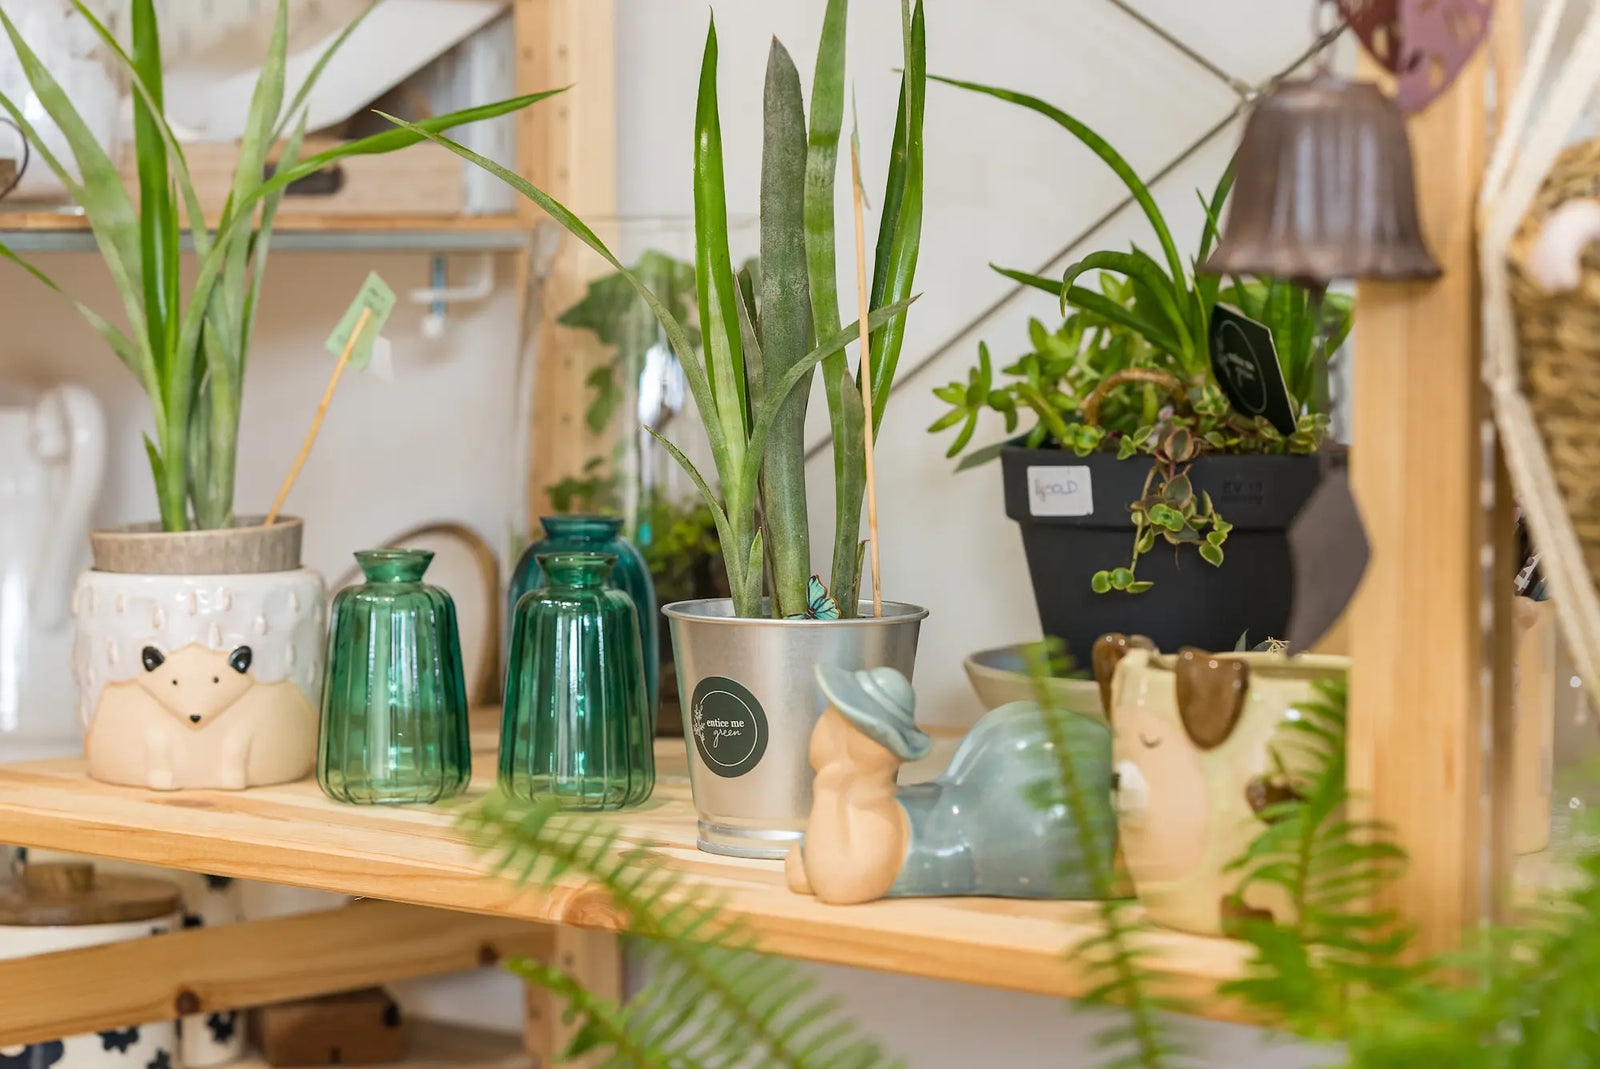 Homeware pot-plants and glass containers sitting on wooden shelf. 